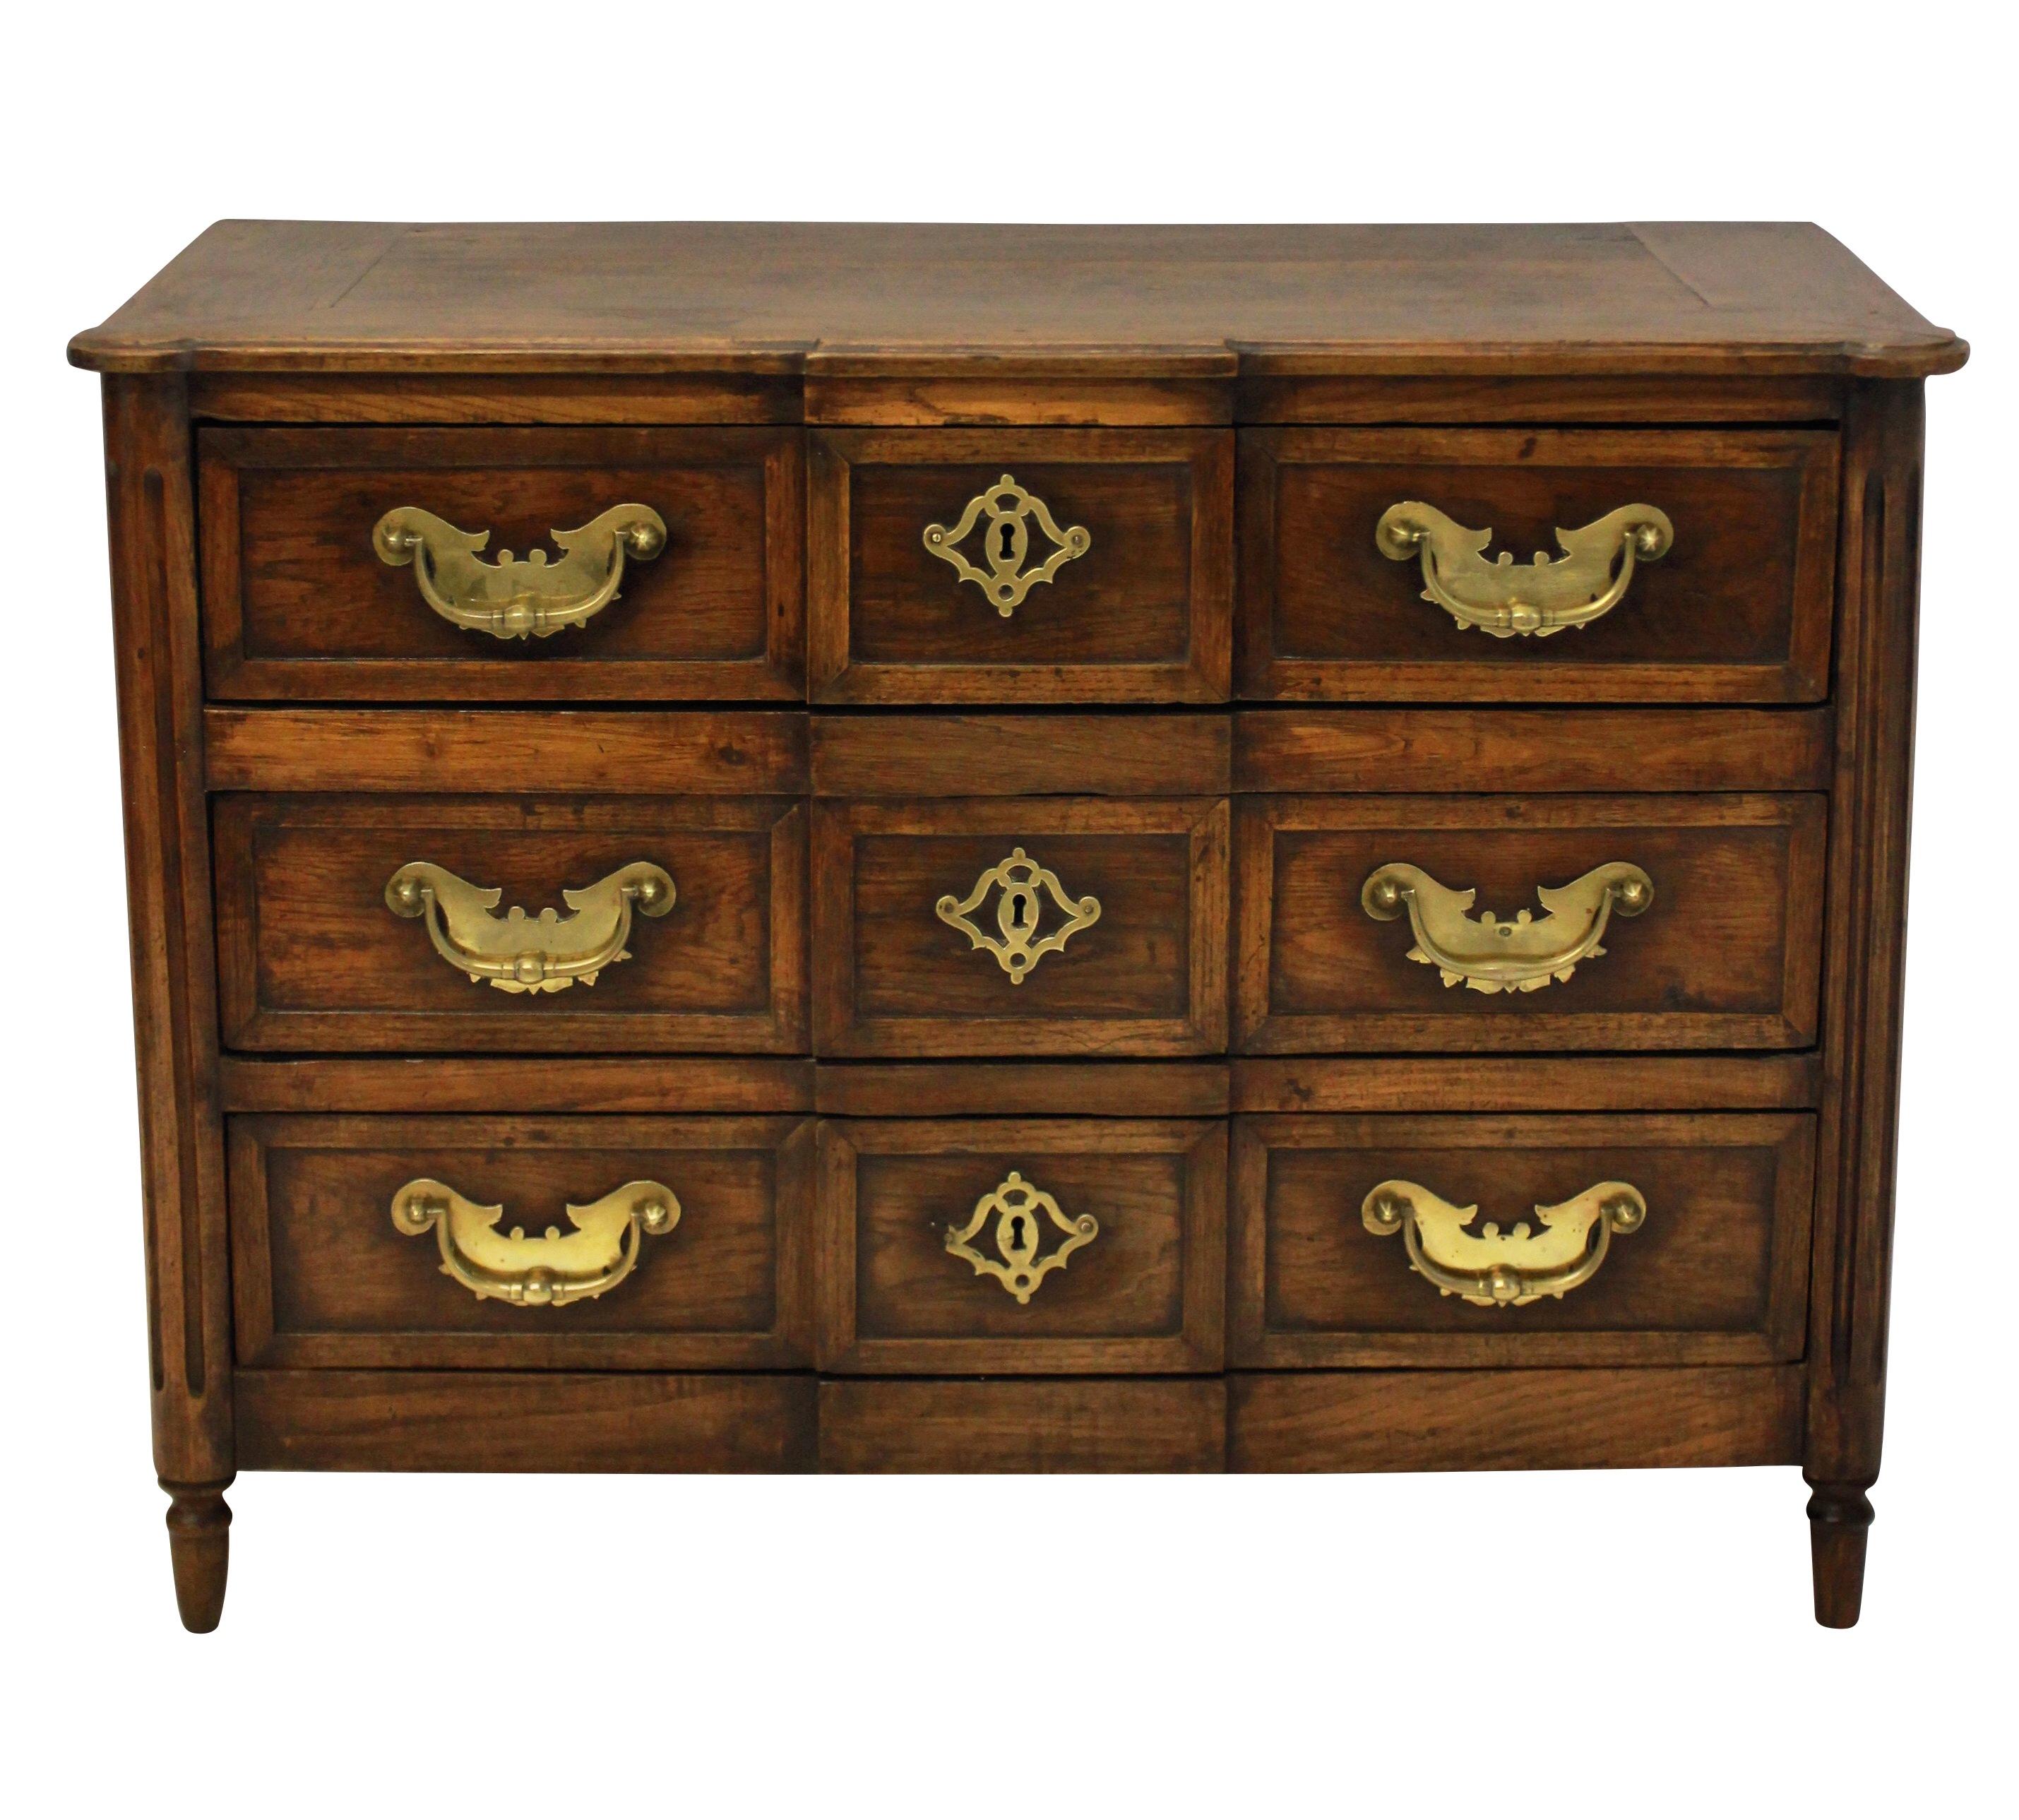 Early 18th Century 18th Century French Provincial Commode in Oak with Fine Metal Work